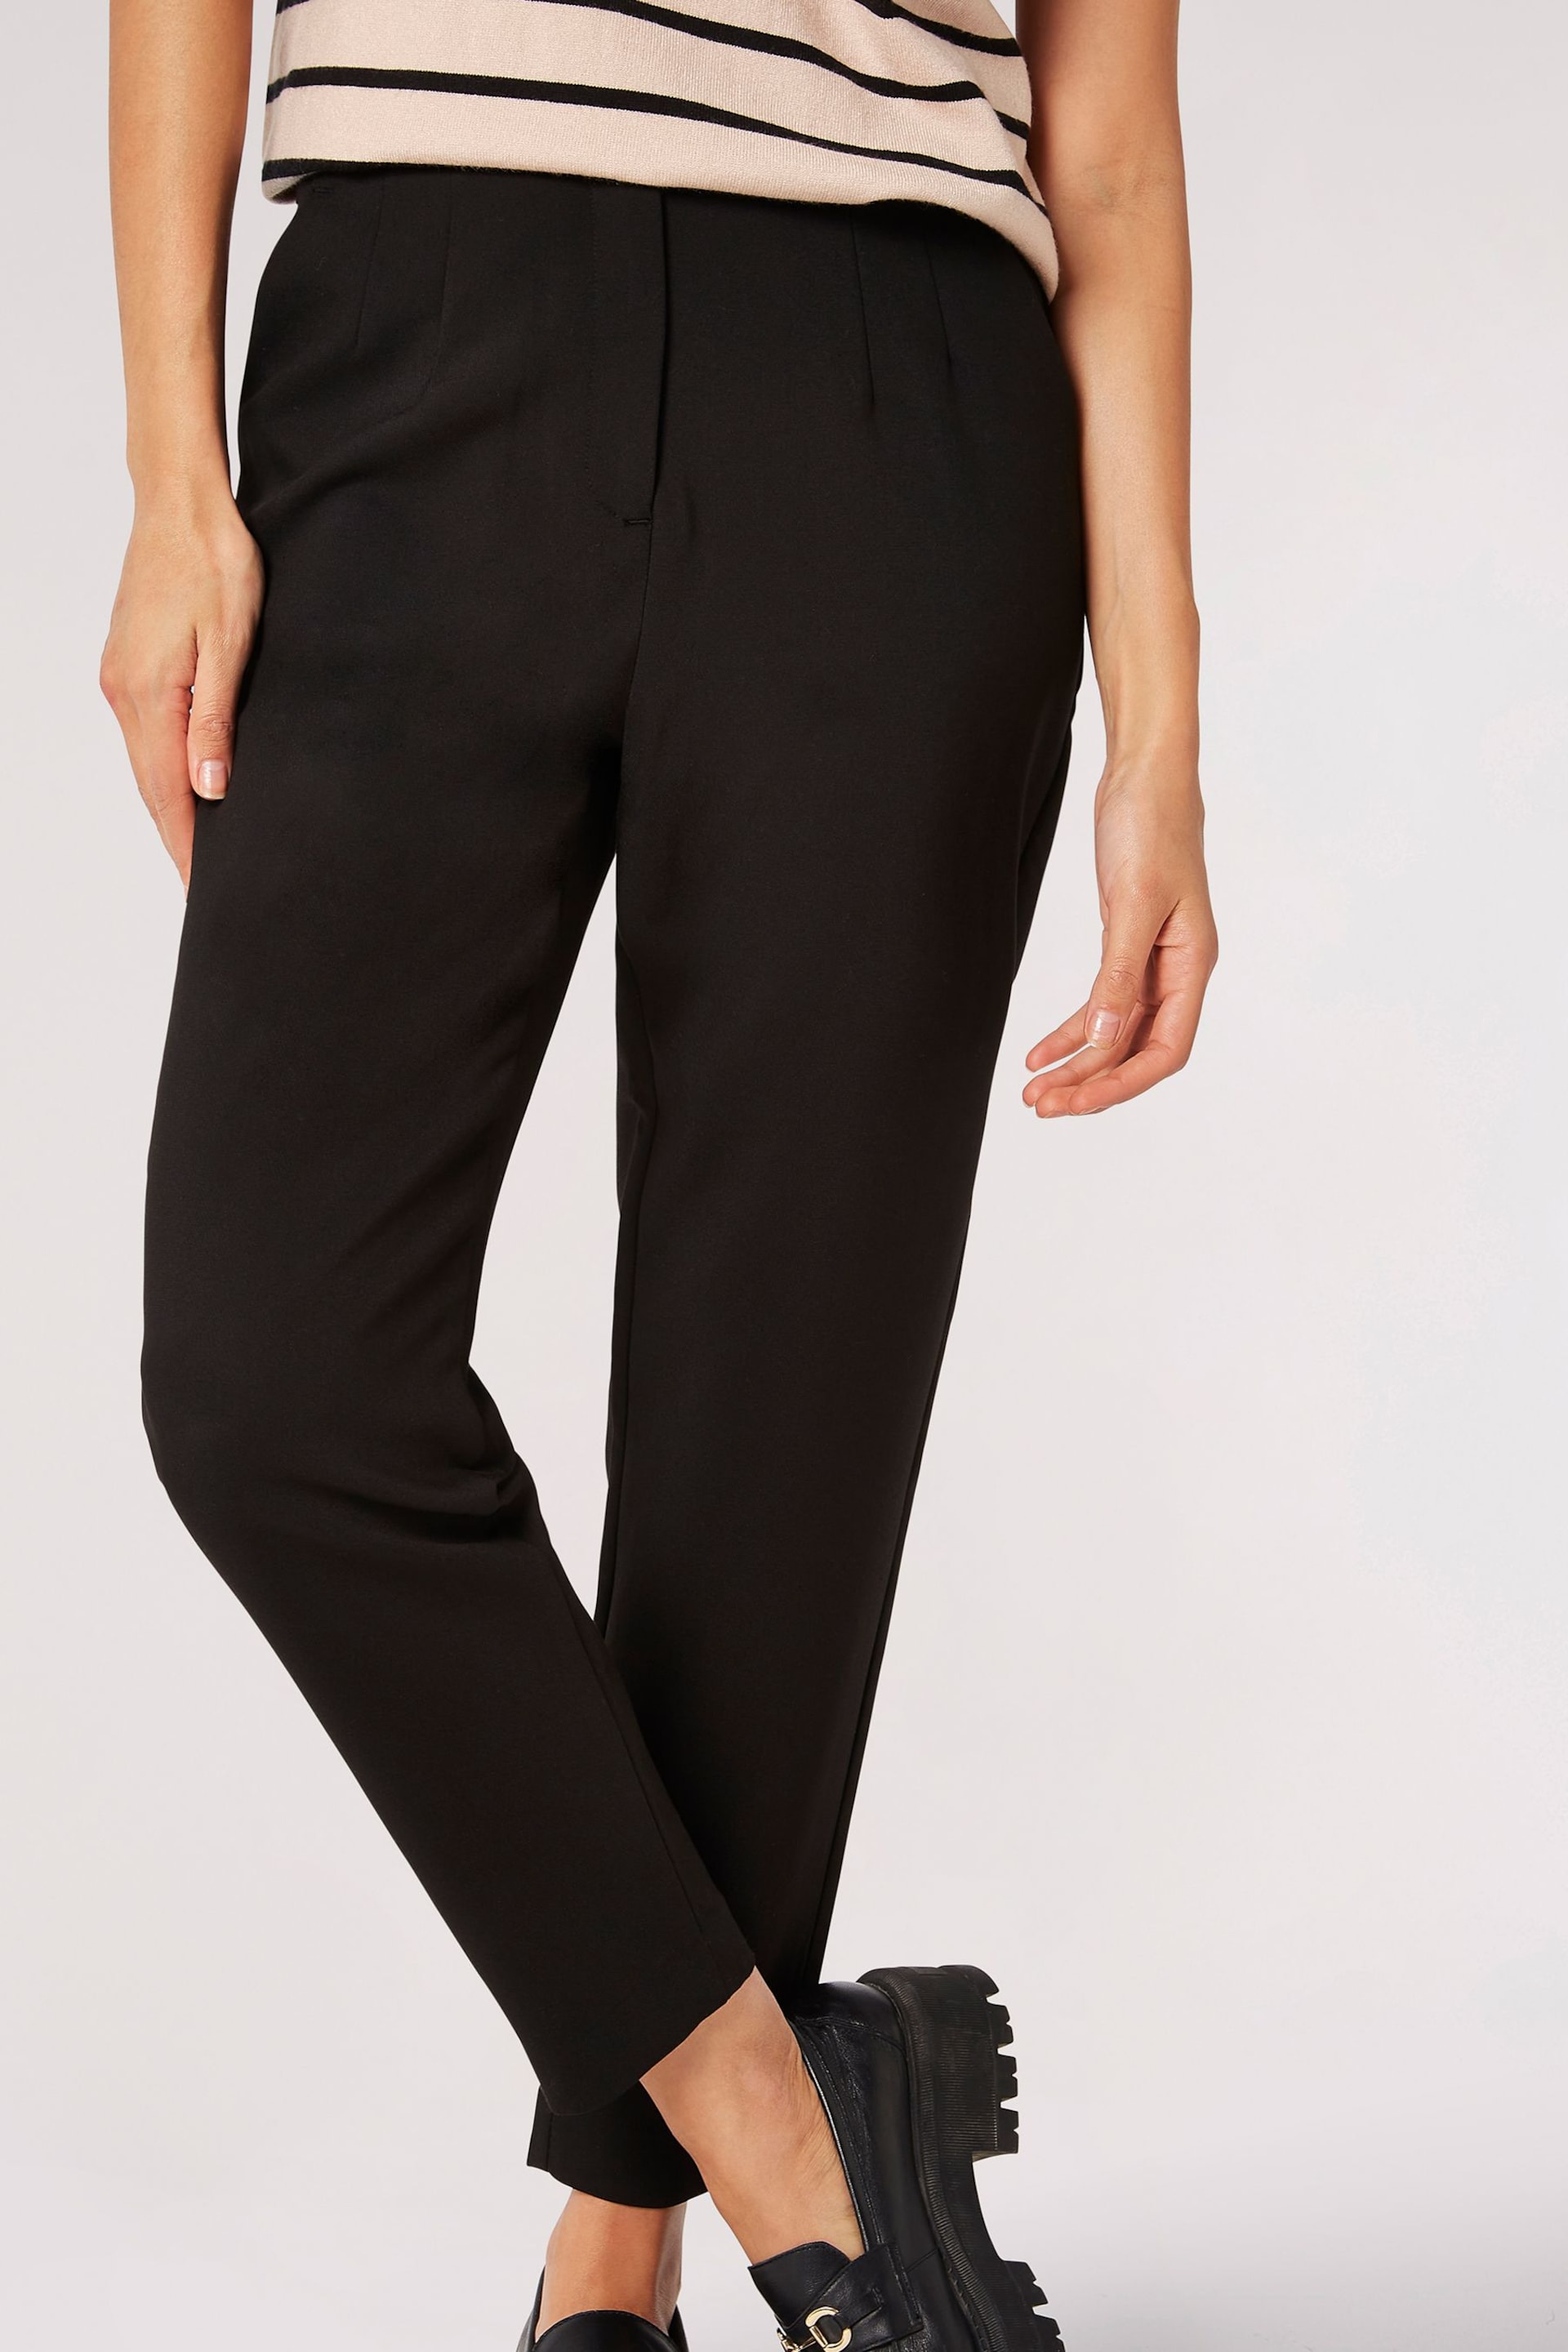 Apricot Black Pintuck Cigarette Trousers - Image 3 of 4